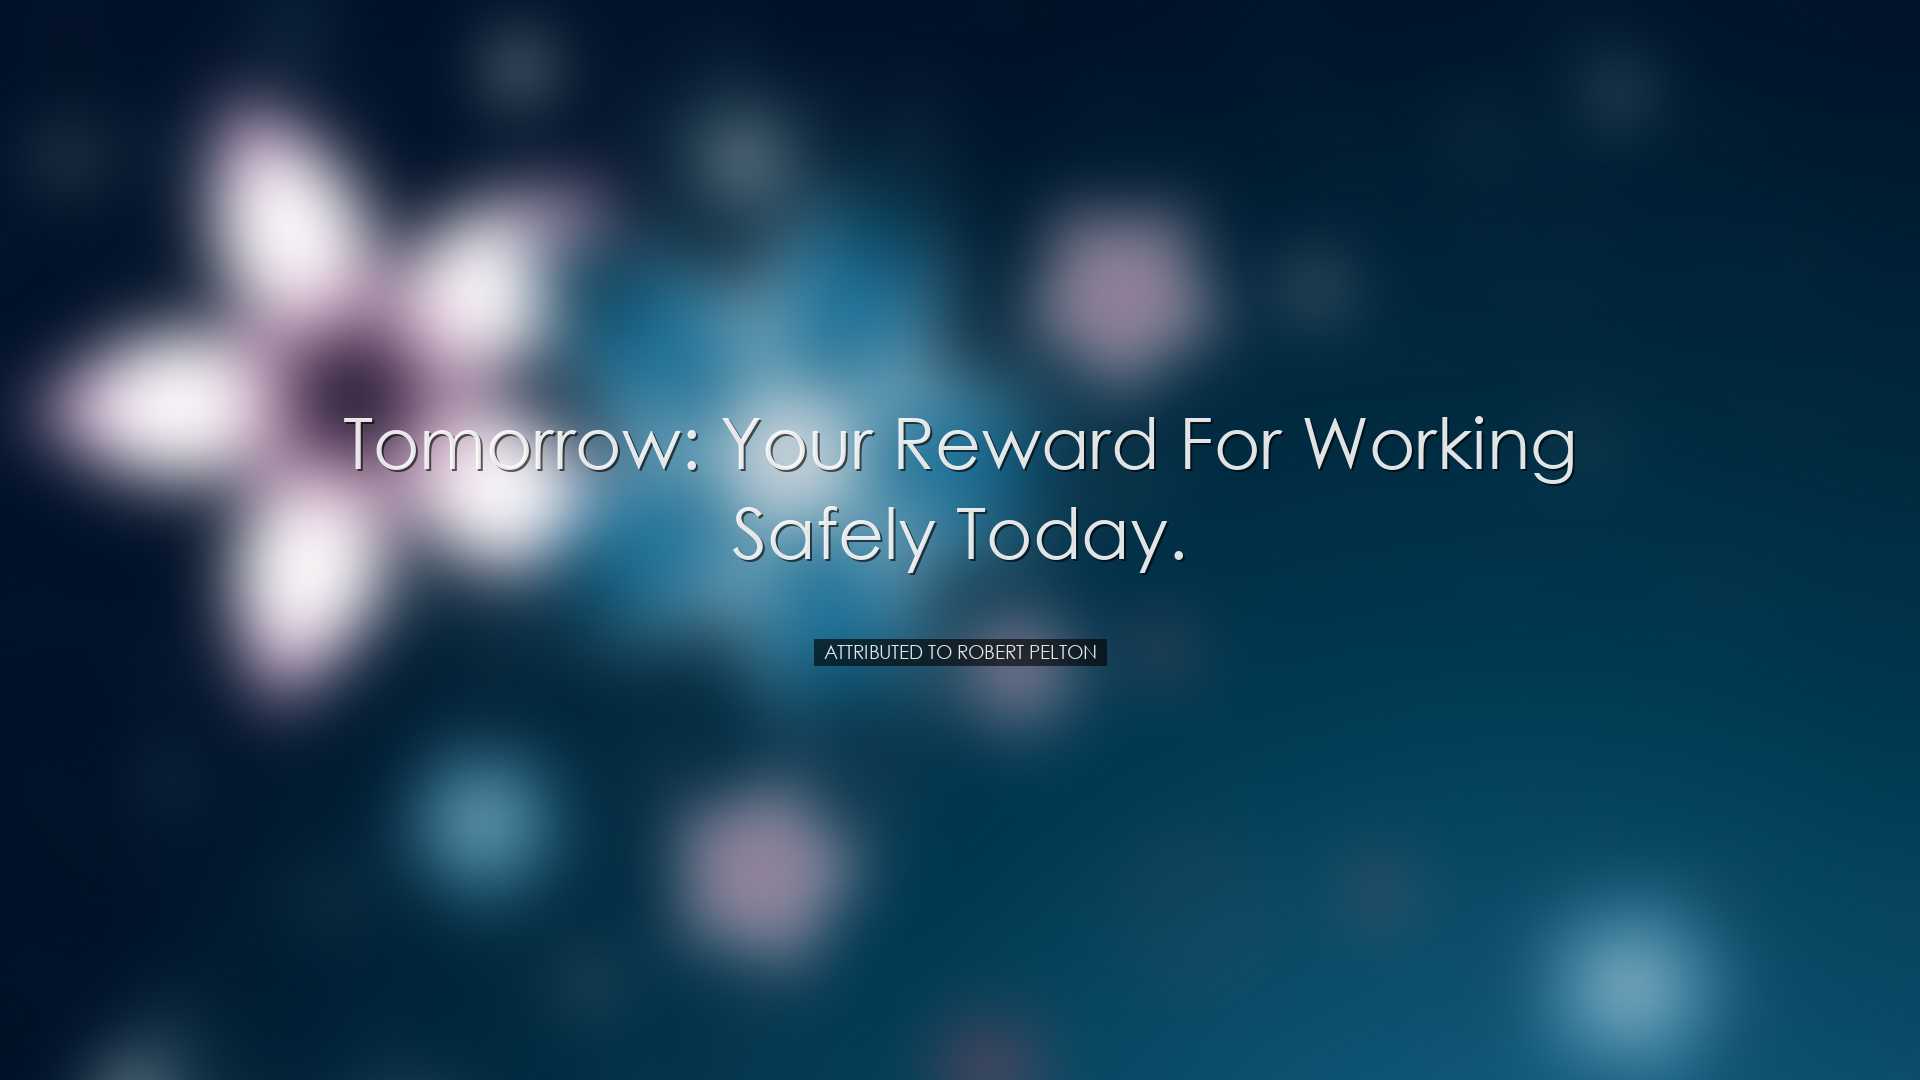 Tomorrow: your reward for working safely today. - Attributed to Ro